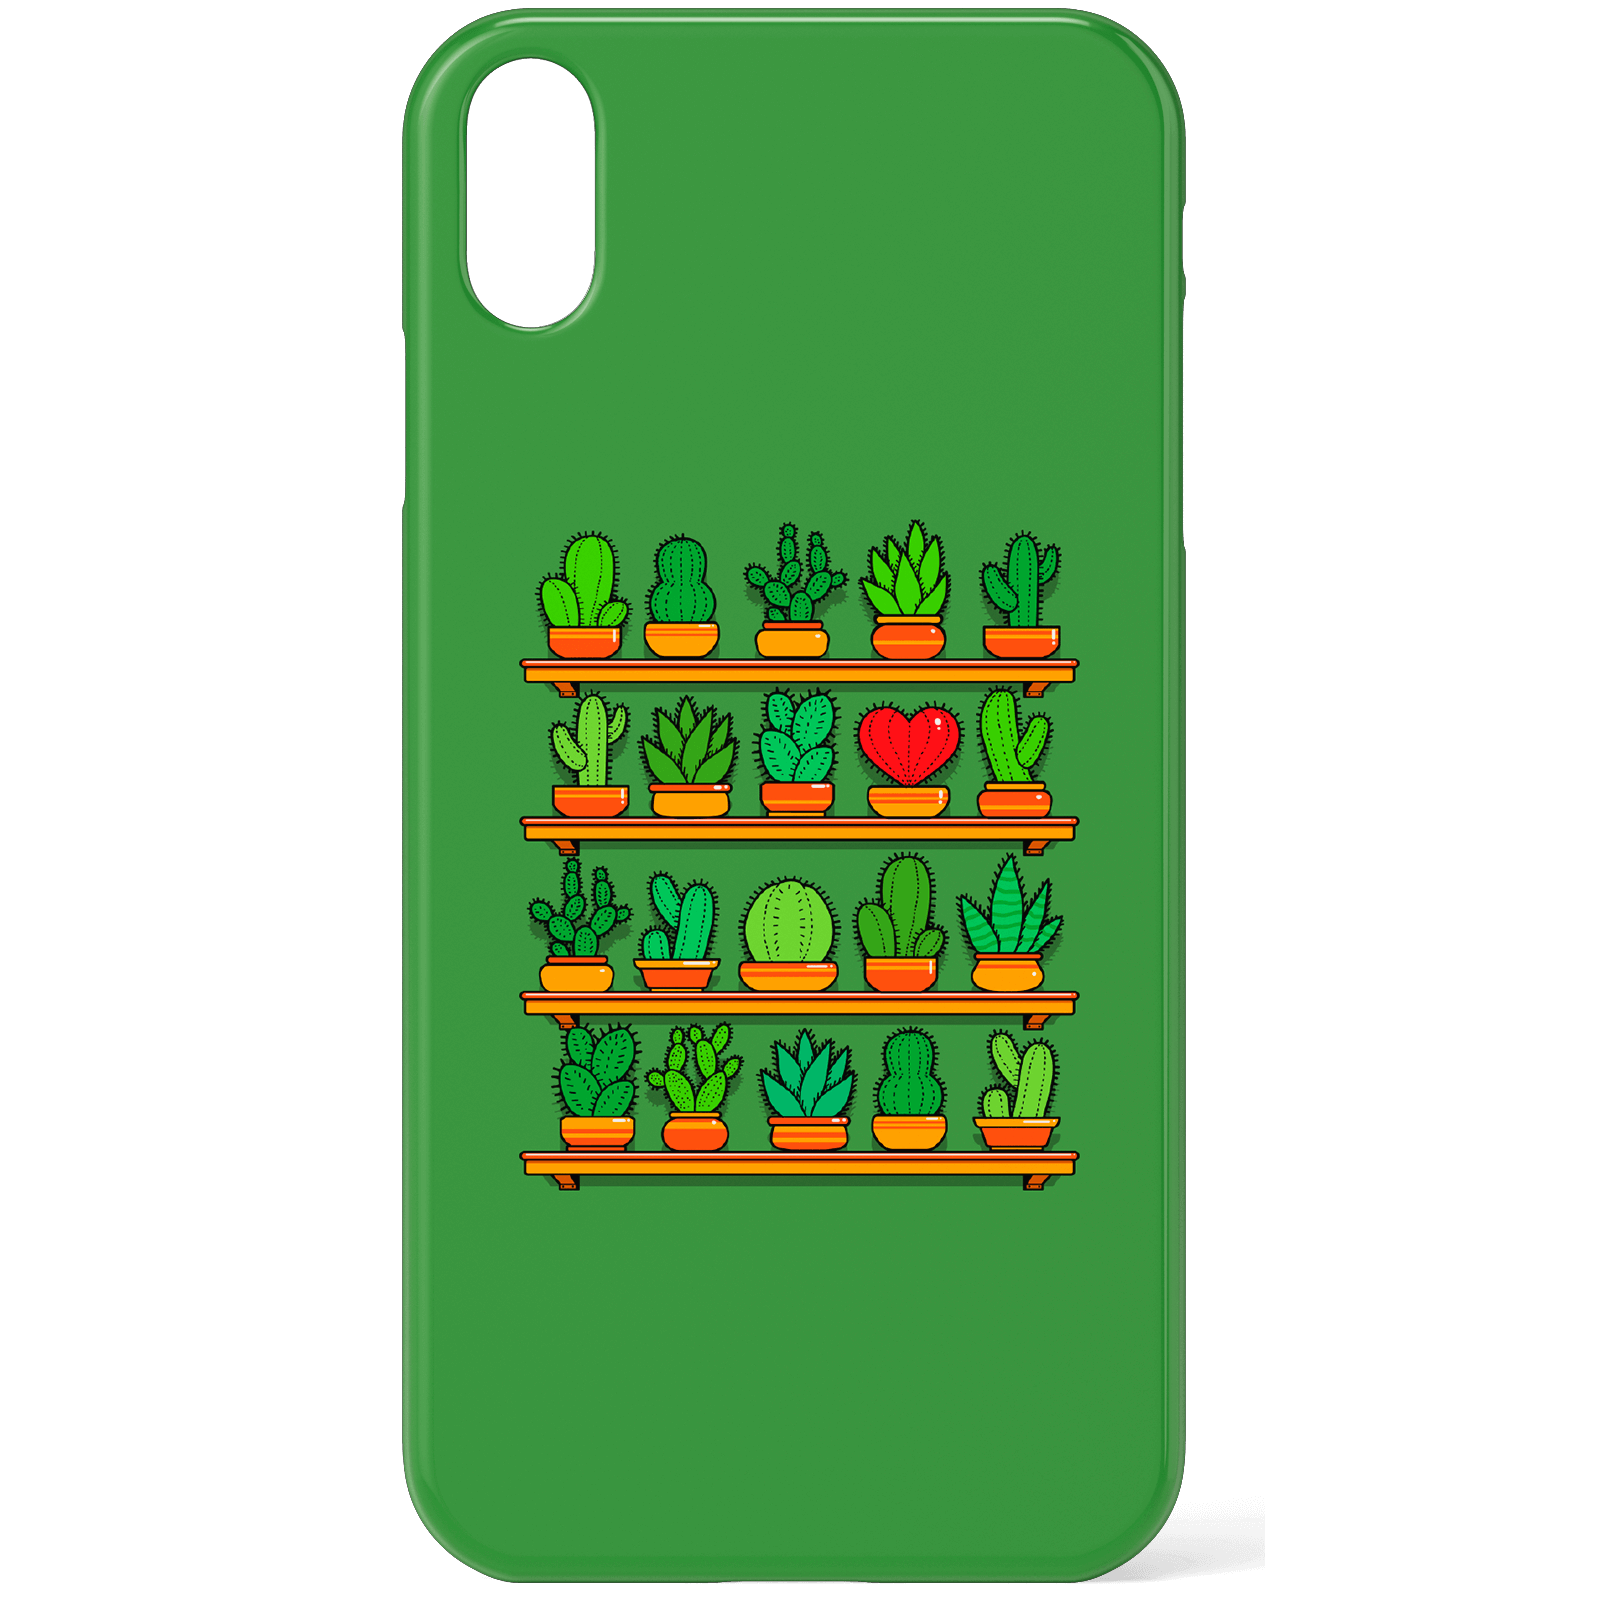 Love Yourself Cactus Heart Phone Case for iPhone and Android - iPhone XS - Snap Case - Matte